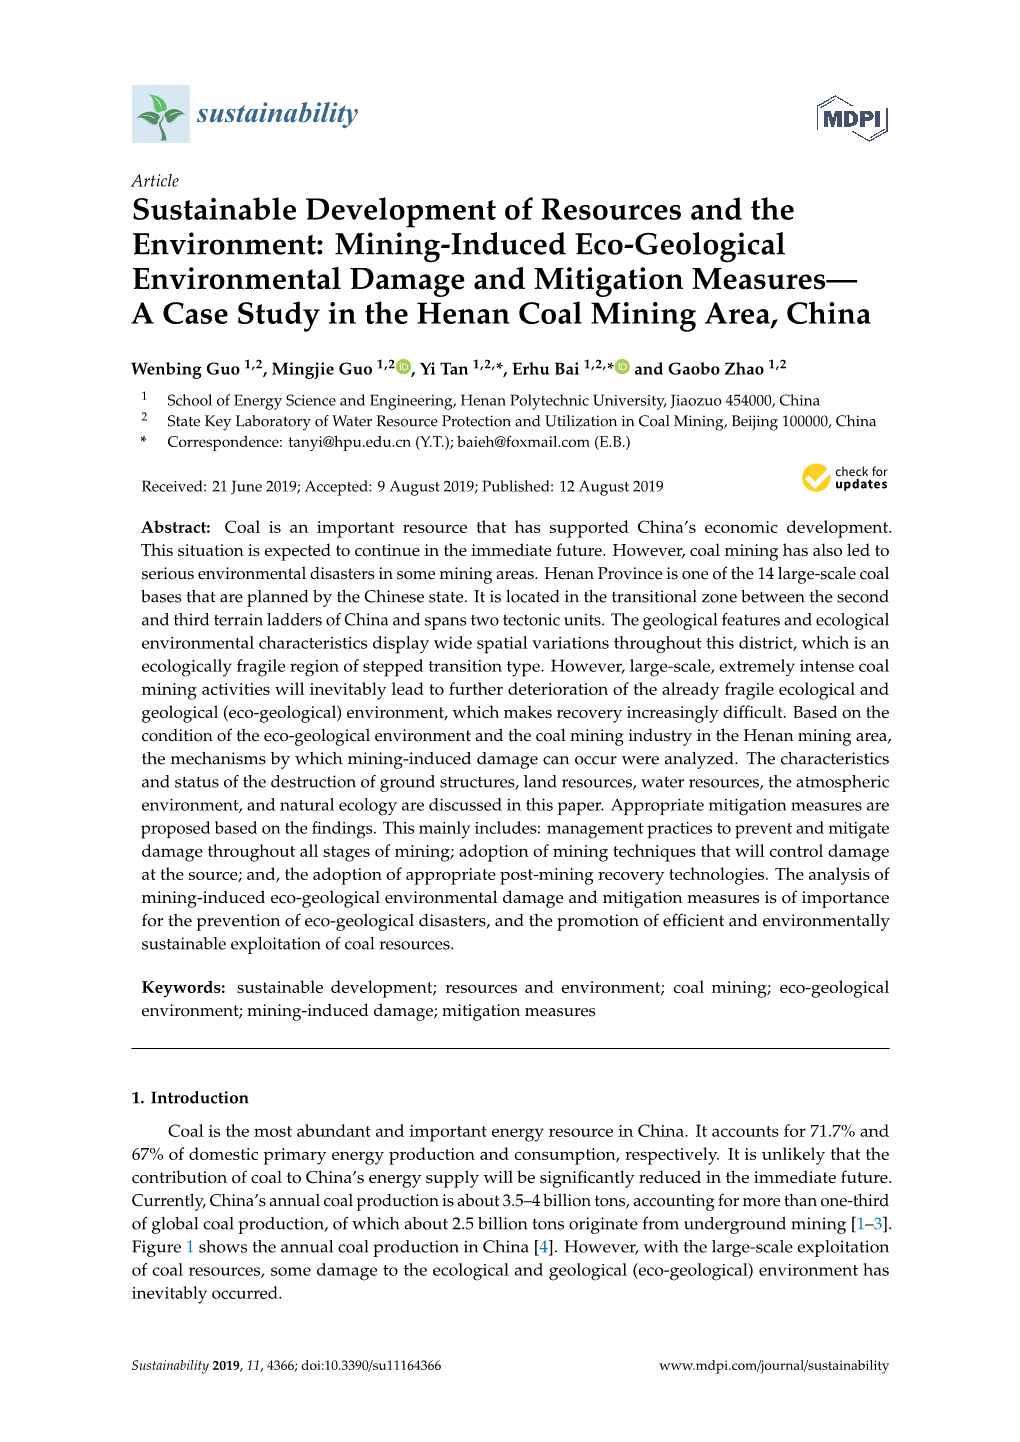 Mining-Induced Eco-Geological Environmental Damage and Mitigation Measures— a Case Study in the Henan Coal Mining Area, China